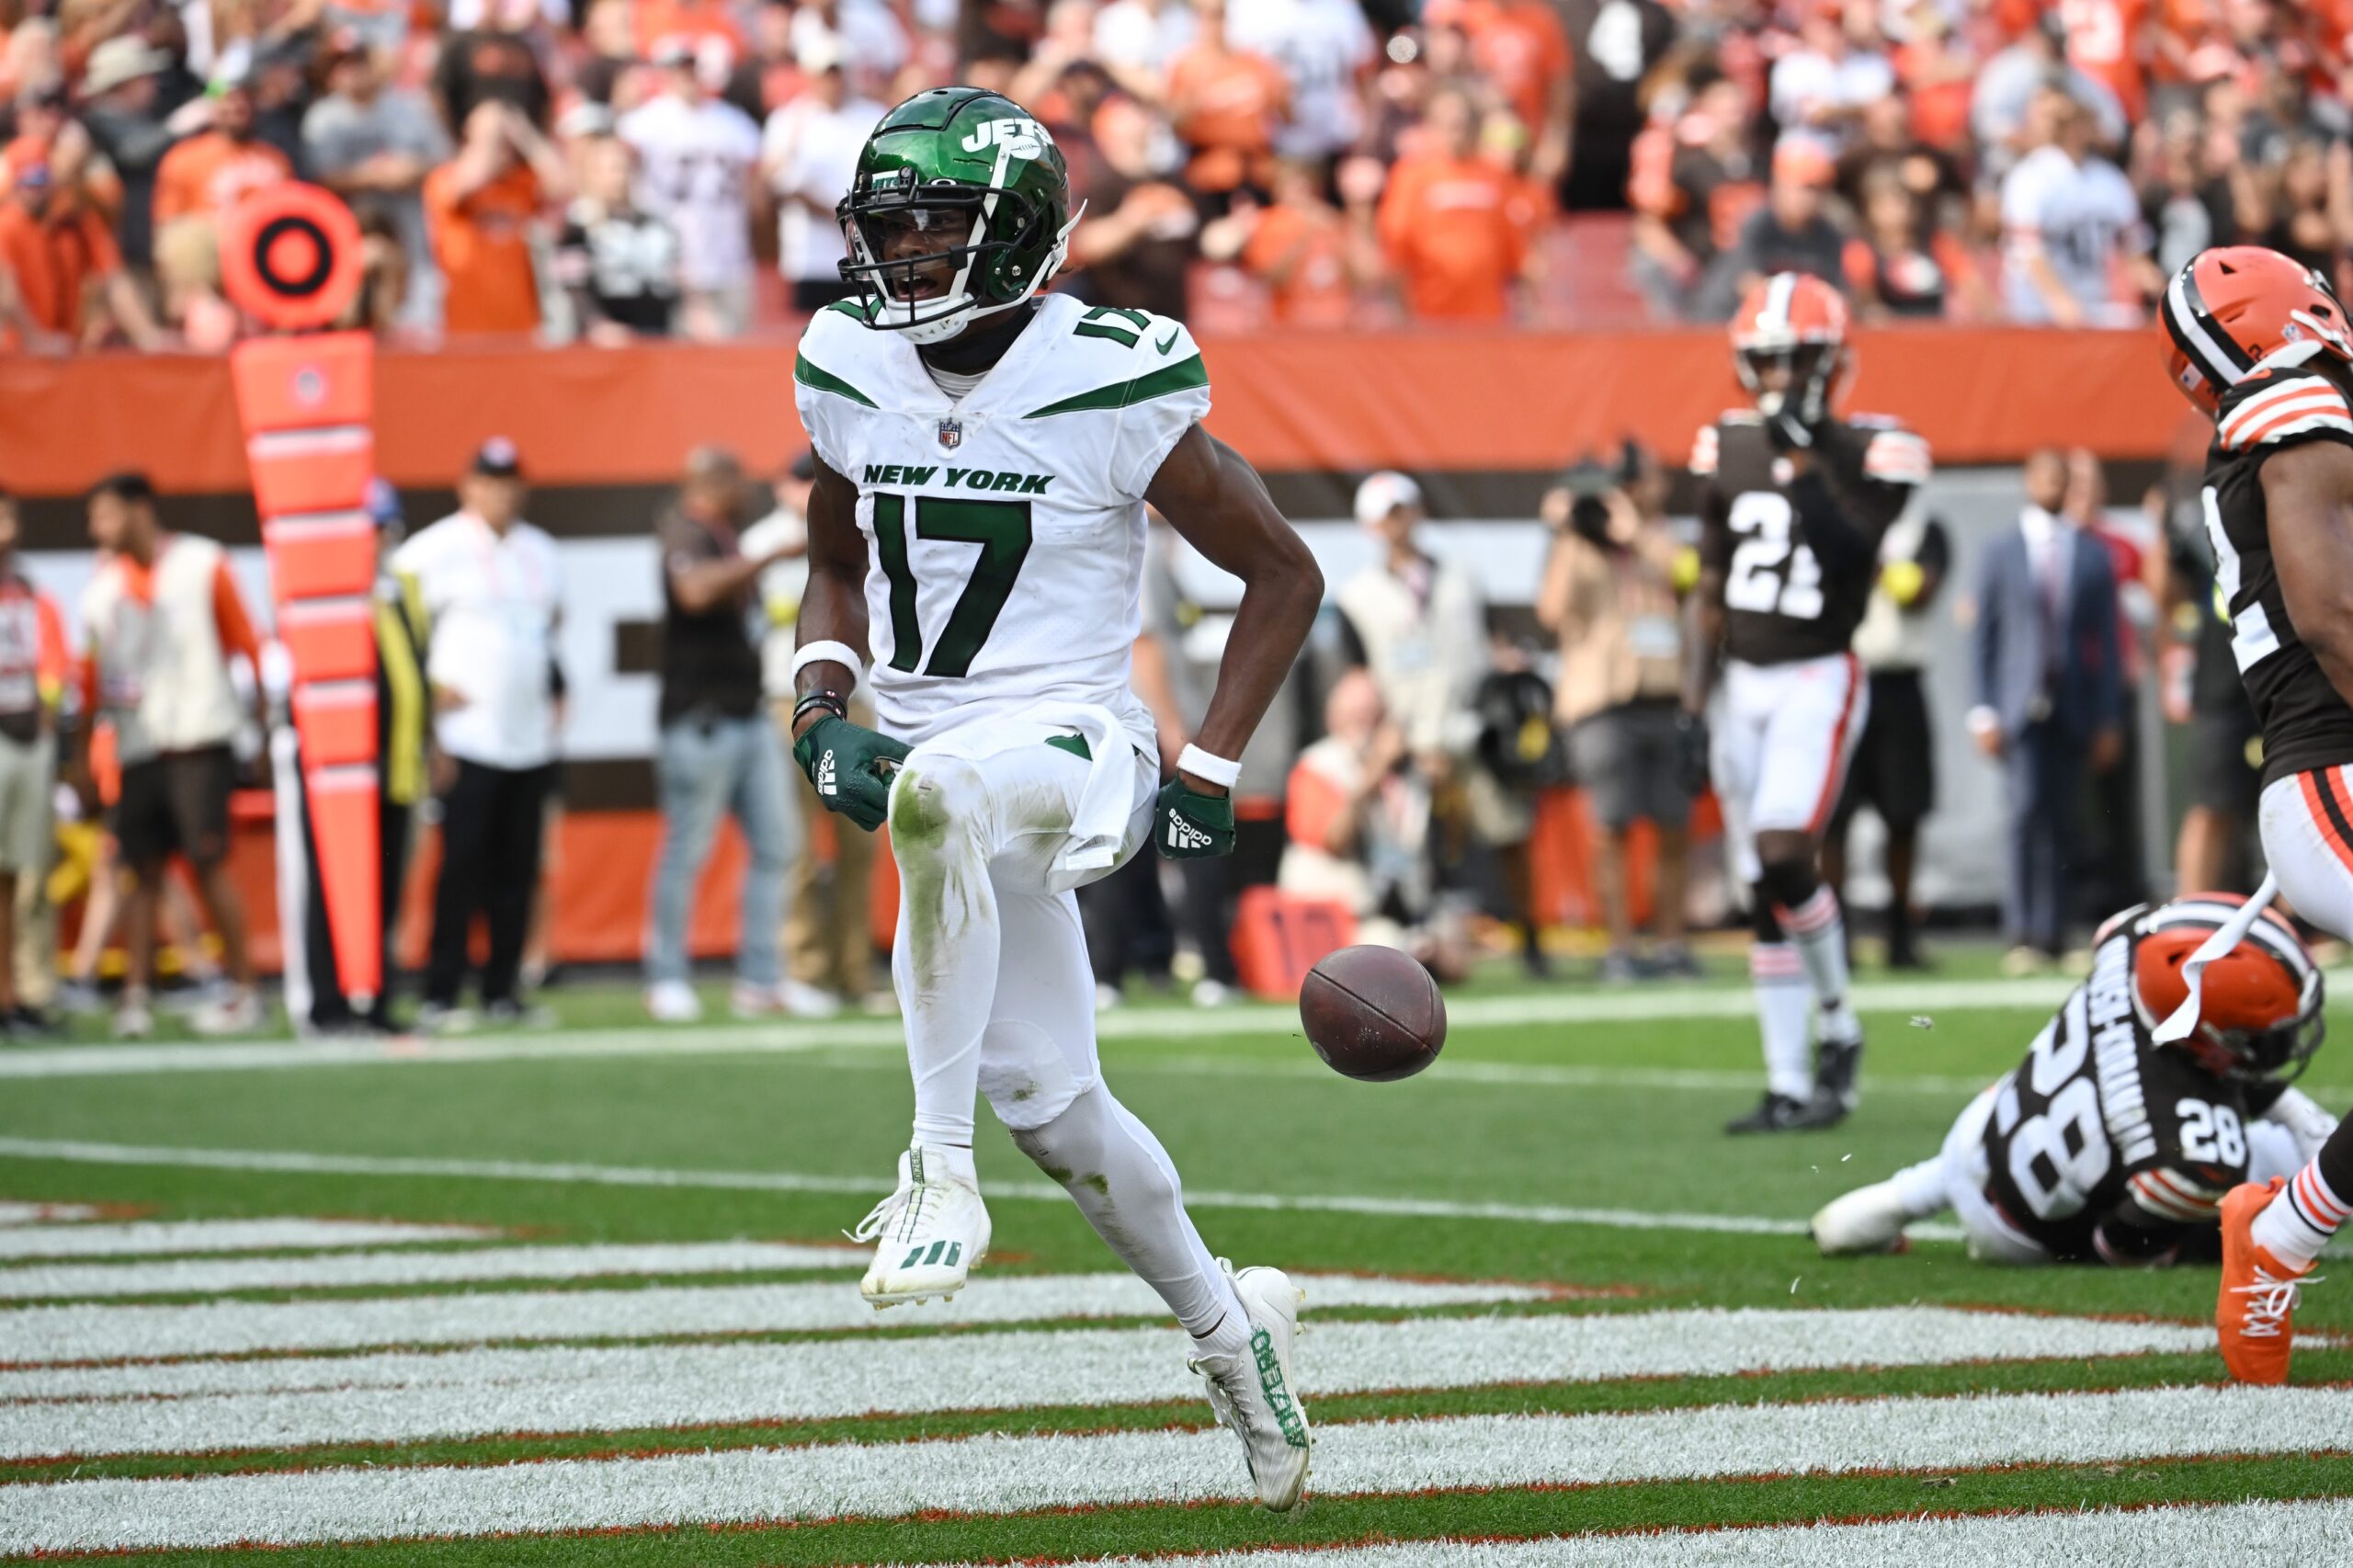 NFL Fantasy Football 2022: Week 3 Waiver Wire adds and rankings